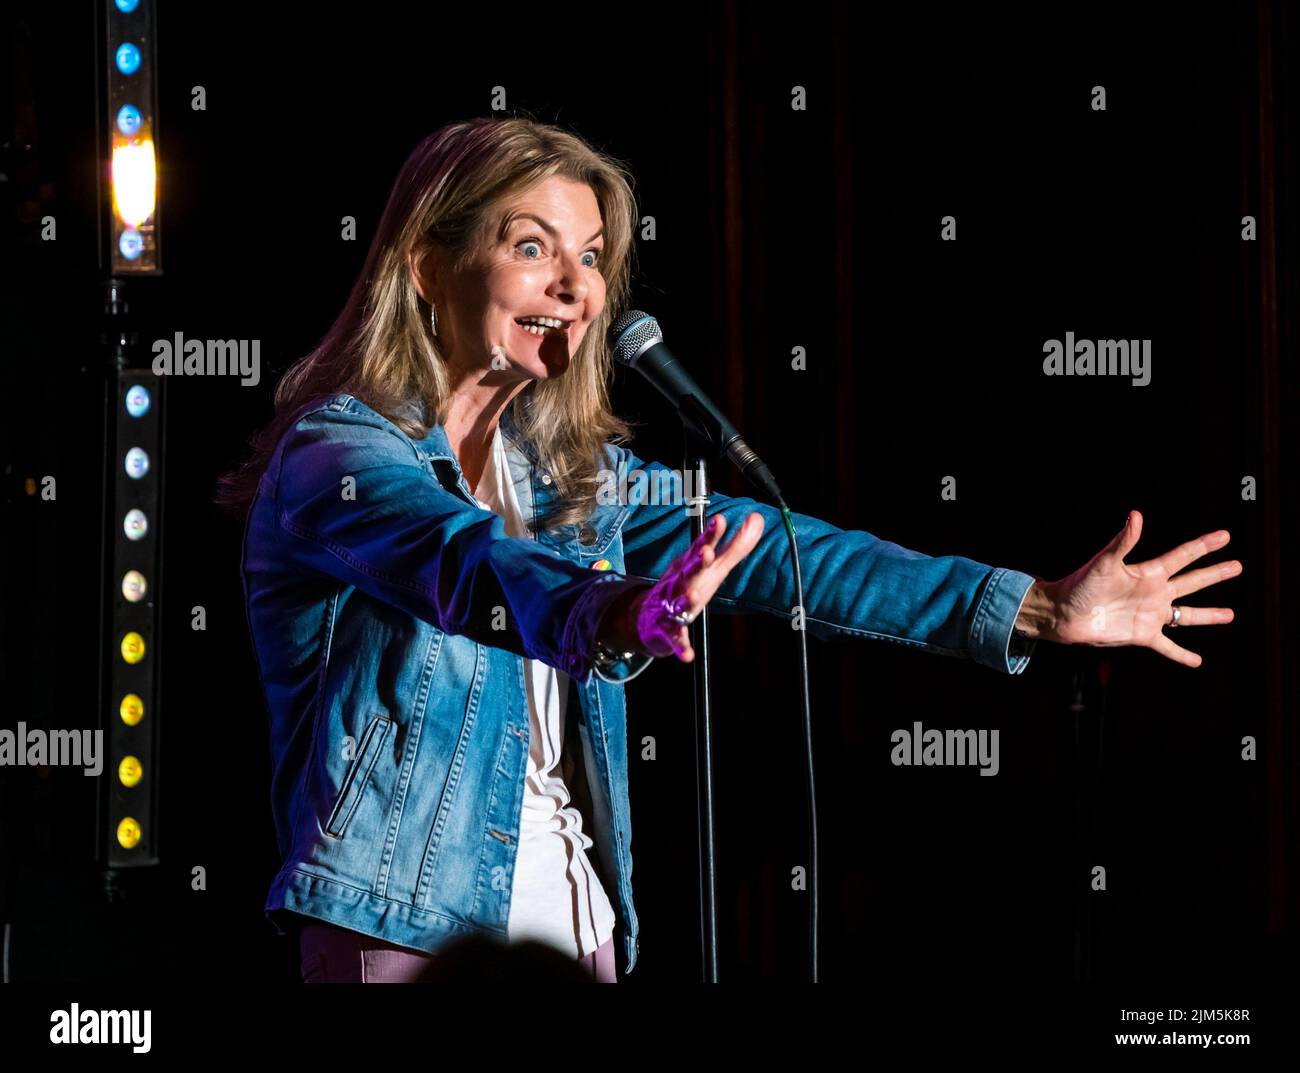 Edinburgh, Scotland, United Kingdom, 4th August 2022. Edinburgh Festival Fringe: The Stand Comedy Club presents a showcase of the comedic talent on offer at this year's Fringe at the New Town Theatre. Pictured: Jo Caulfield who acted as compere.  Credit: Sally Anderson/Alamy Live News Stock Photo